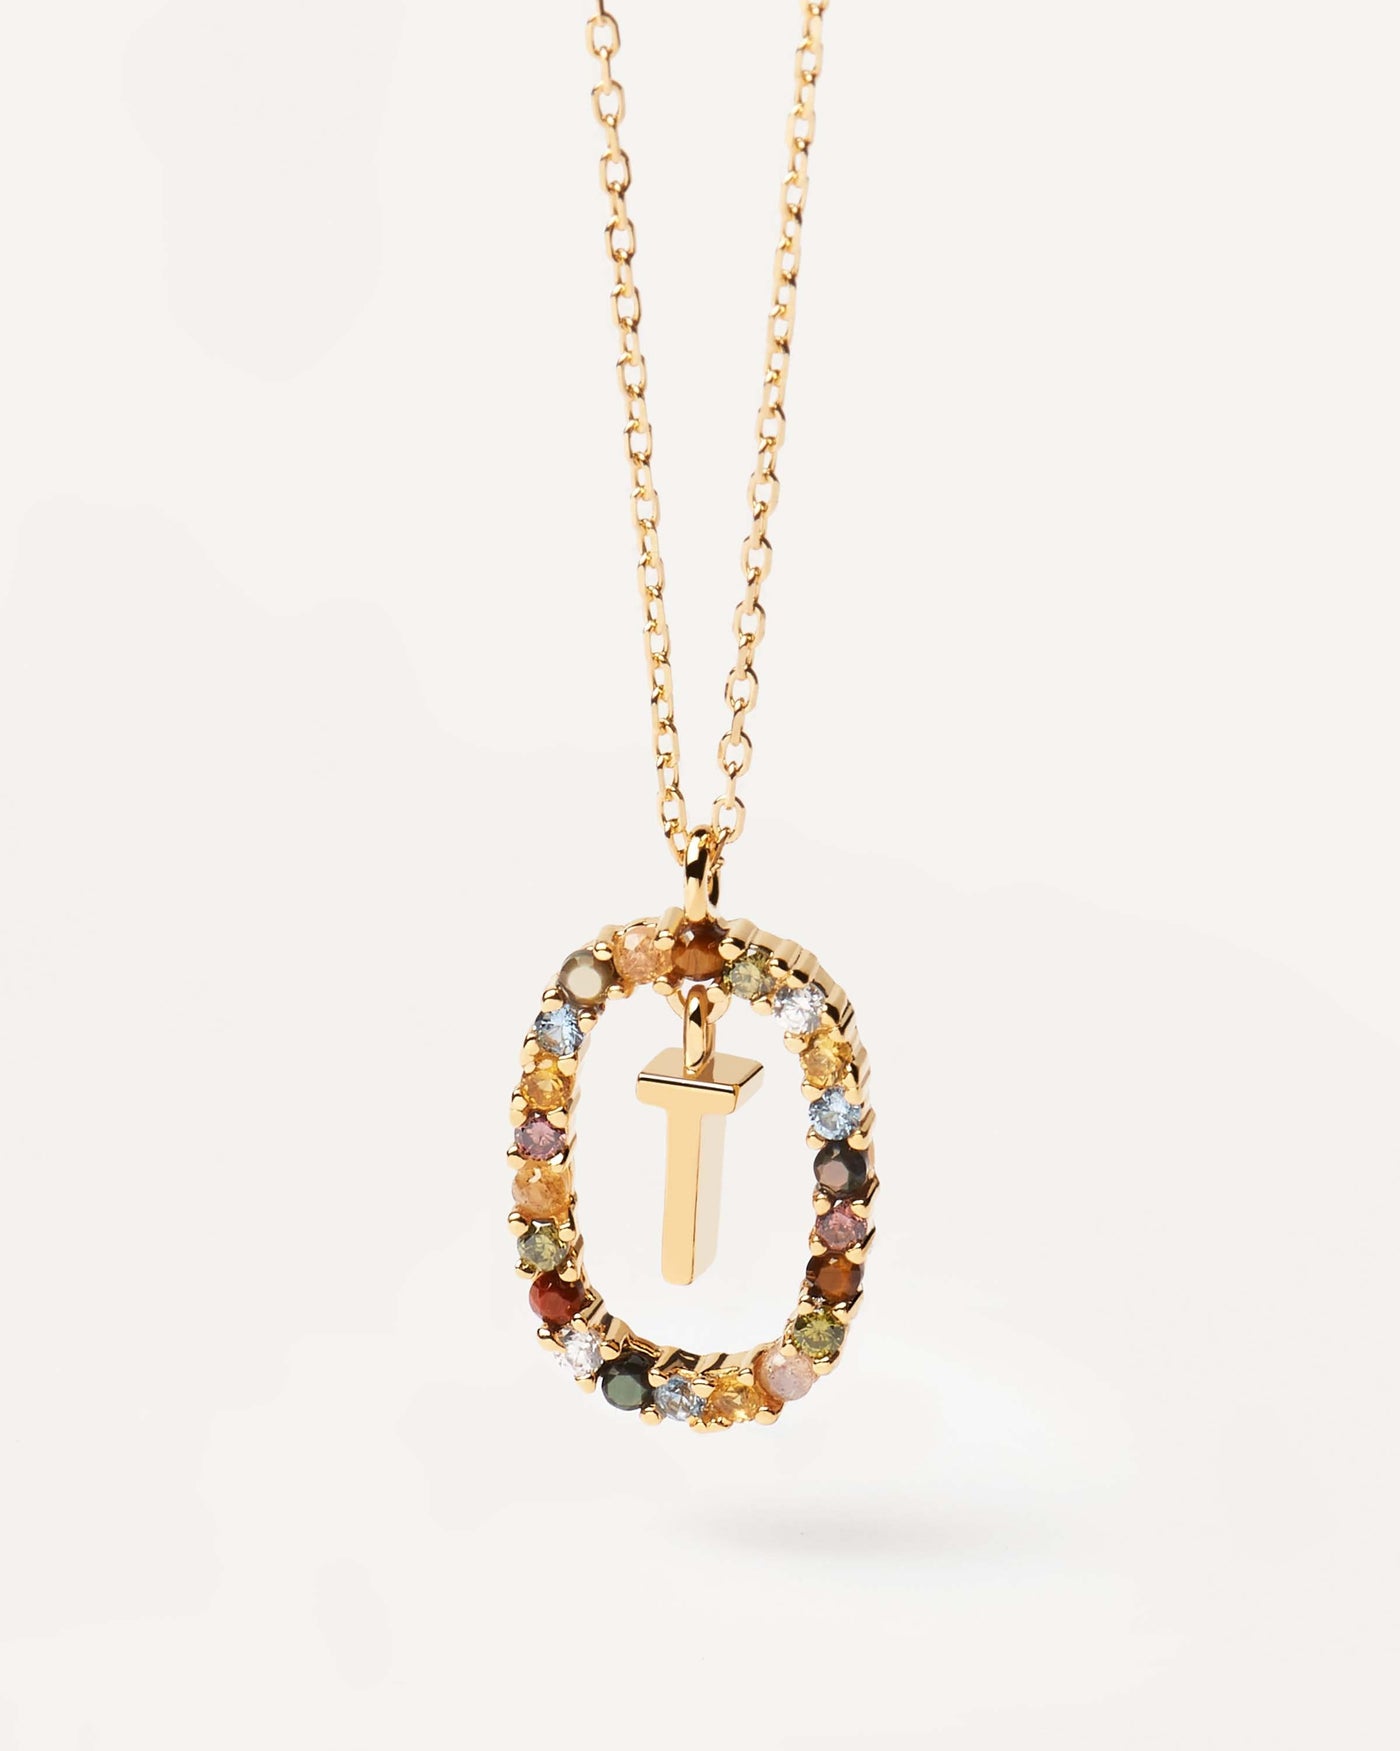 2023 Selection | Letter T necklace. Initial T necklace in gold-plated silver, circled by colorful gemstones. Get the latest arrival from PDPAOLA. Place your order safely and get this Best Seller. Free Shipping.